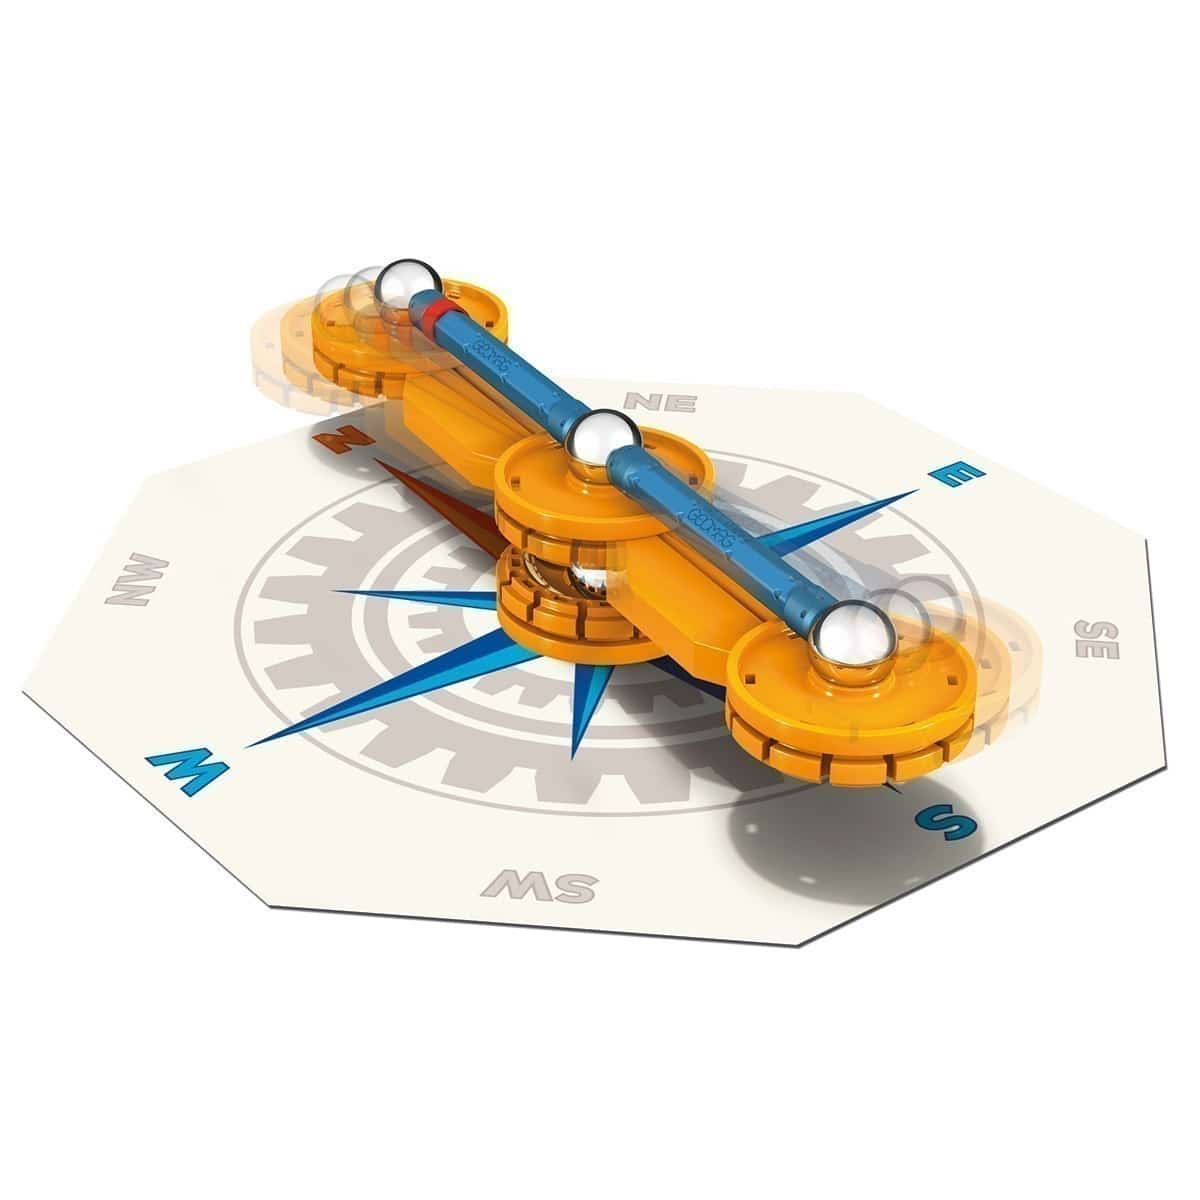 Geomag - Mechanics - Build Your Own Compass